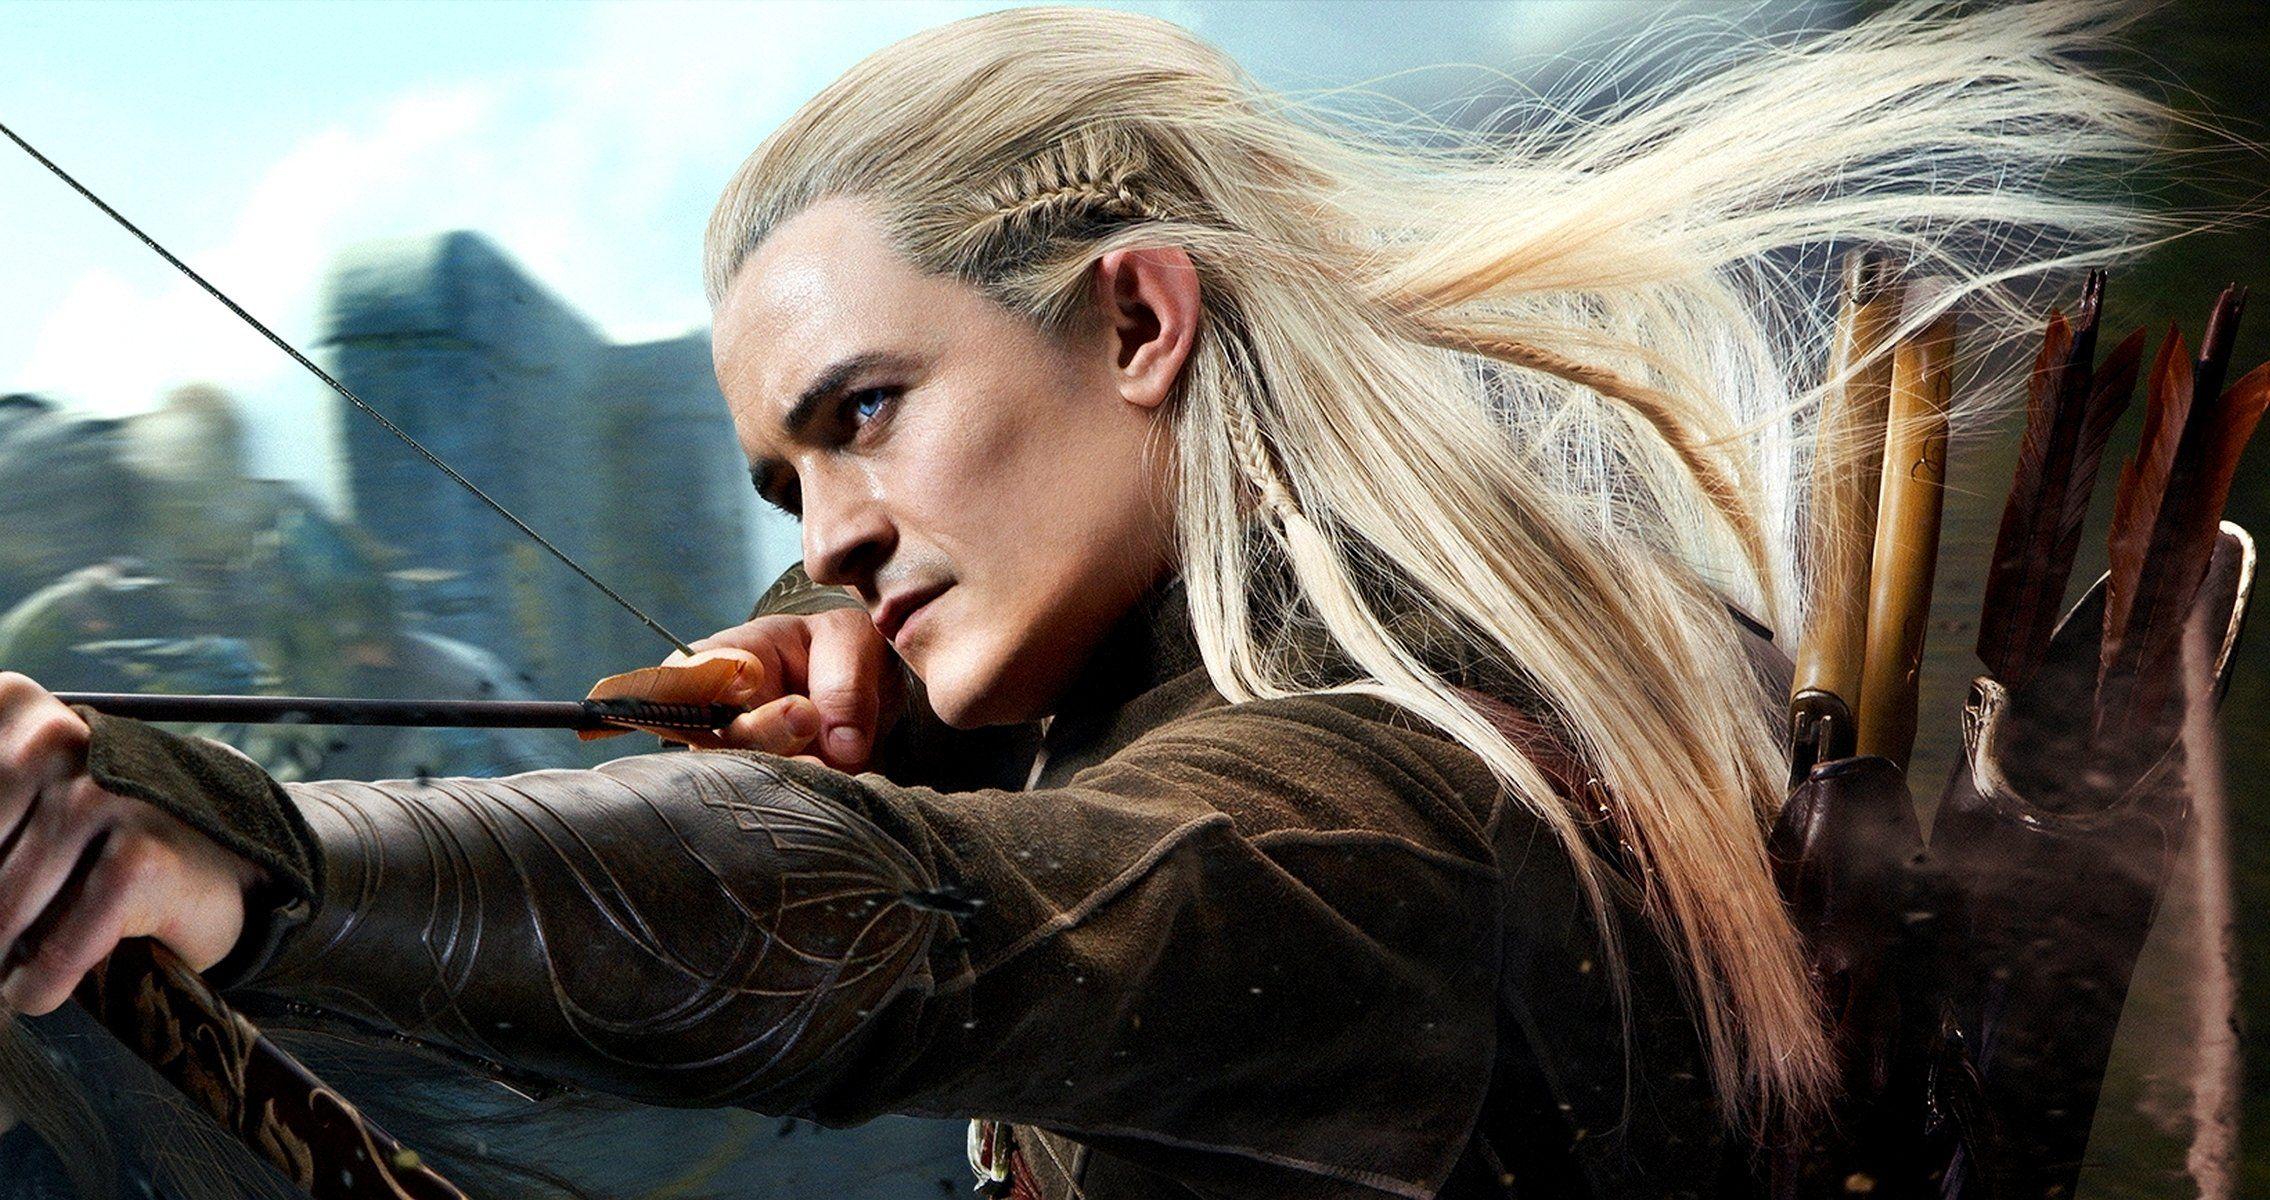 Free download The Hobbit Legolas Wallpaper Images amp Pictures Becuo  1600x900 for your Desktop Mobile  Tablet  Explore 74 Legolas Wallpaper   Legolas Wallpapers Legolas Greenleaf Wallpaper Legolas iPhone Wallpaper